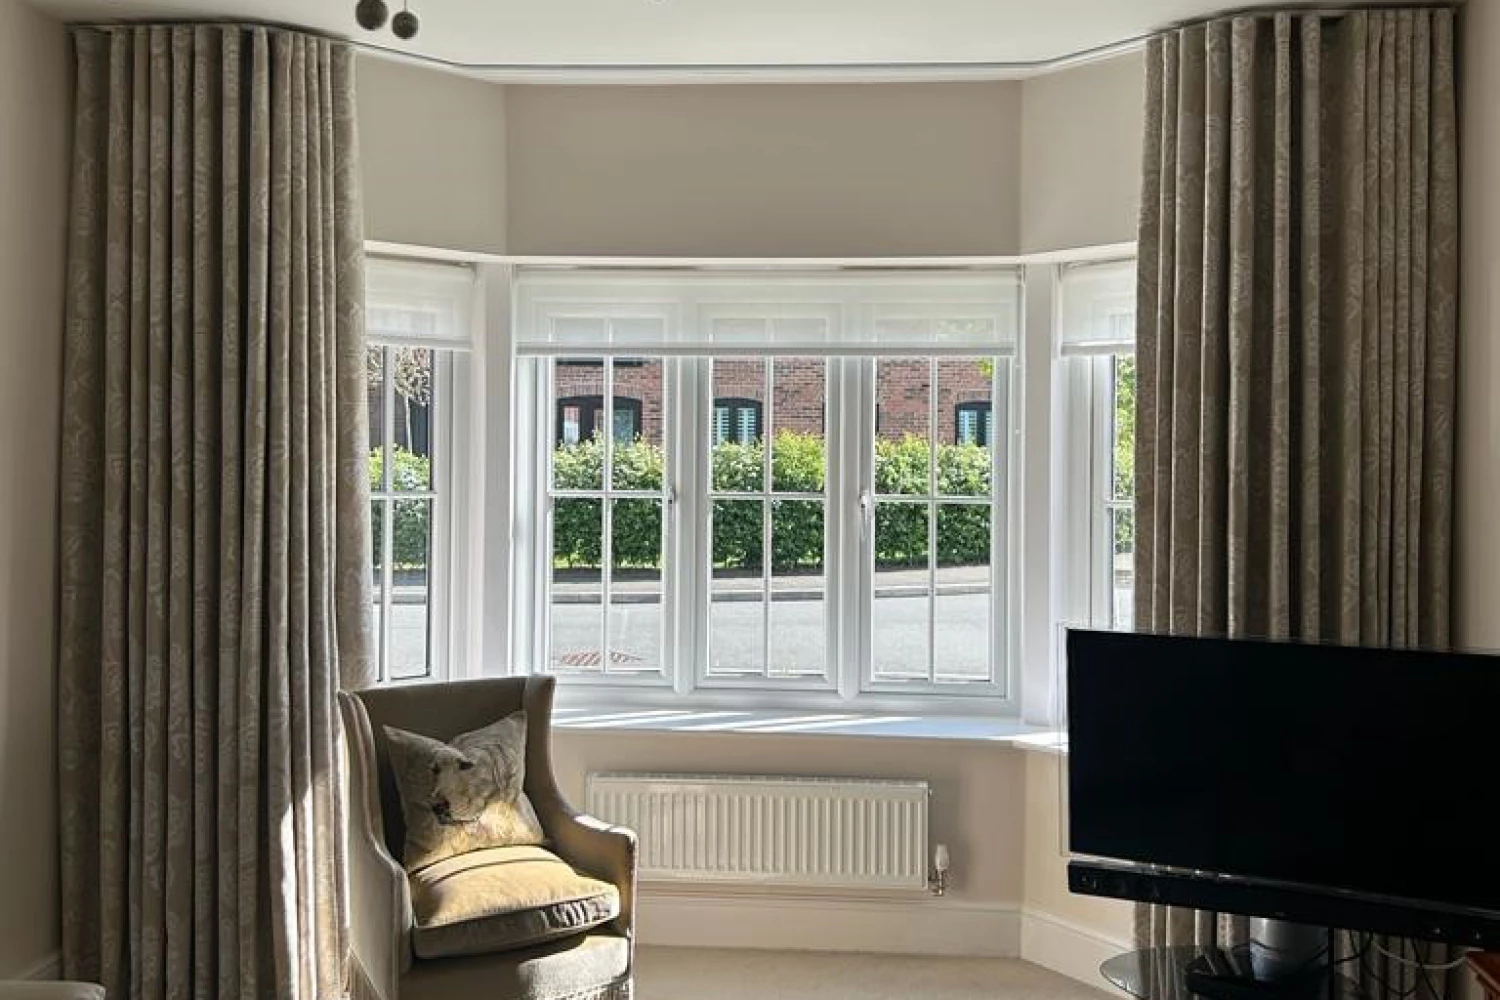 Wave heading curtains in bay window